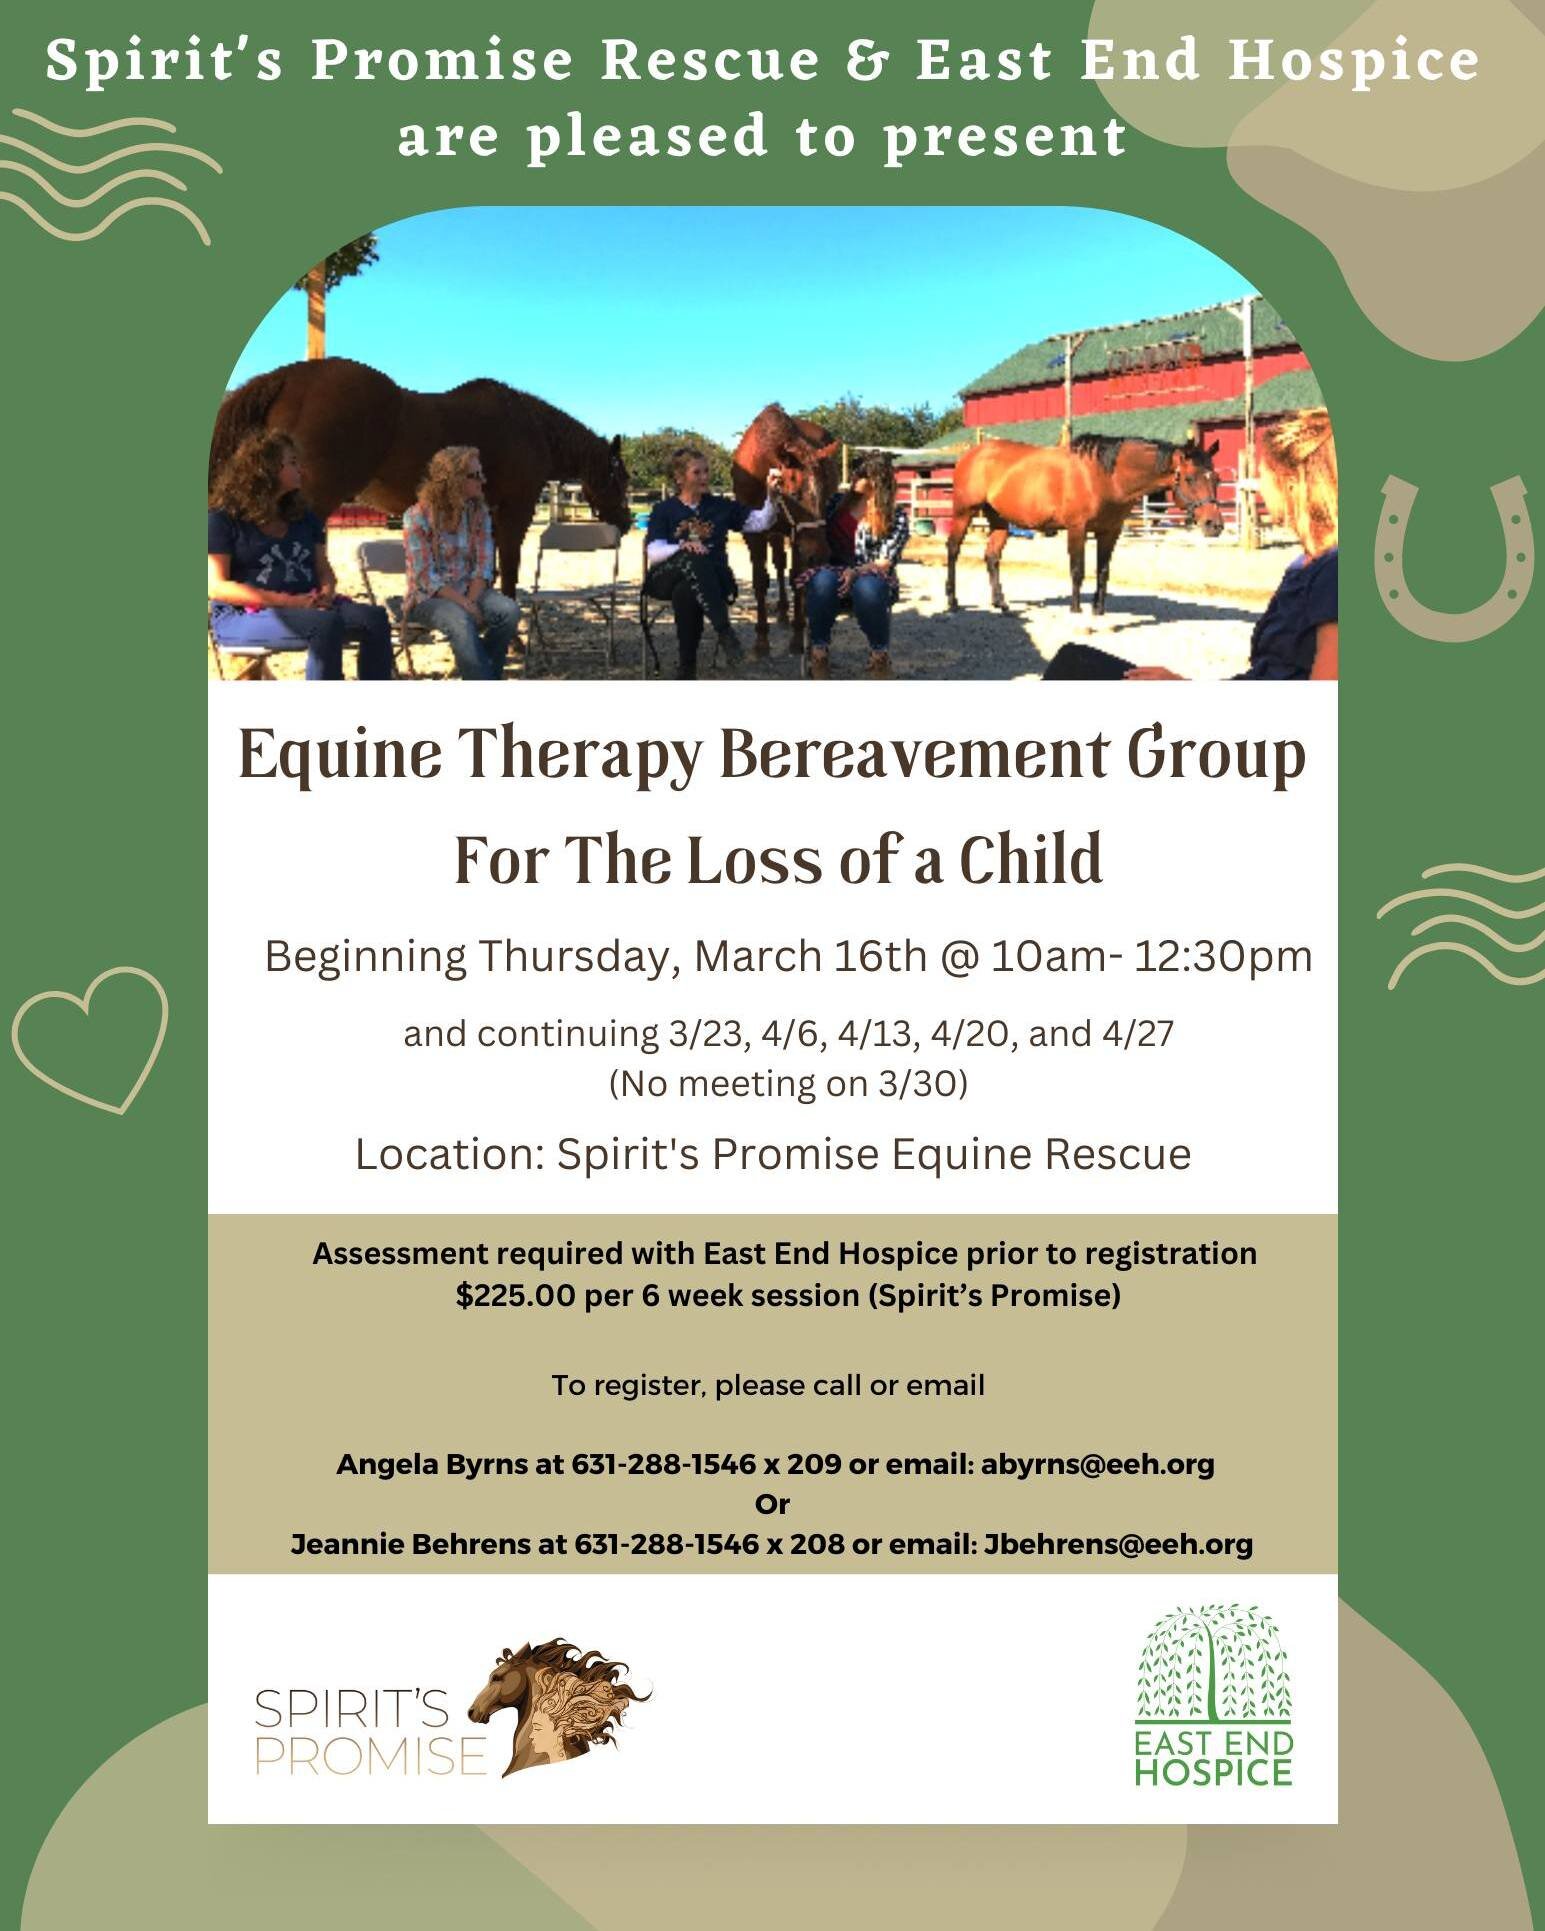 For more information and a pre-assessment (required), please call East End Hospice at 631-288-1546 and speak with Angela (ext. 209) or Jeannie (ext. 208). Registration and payment to Spirit's Promise must be completed before the first session.